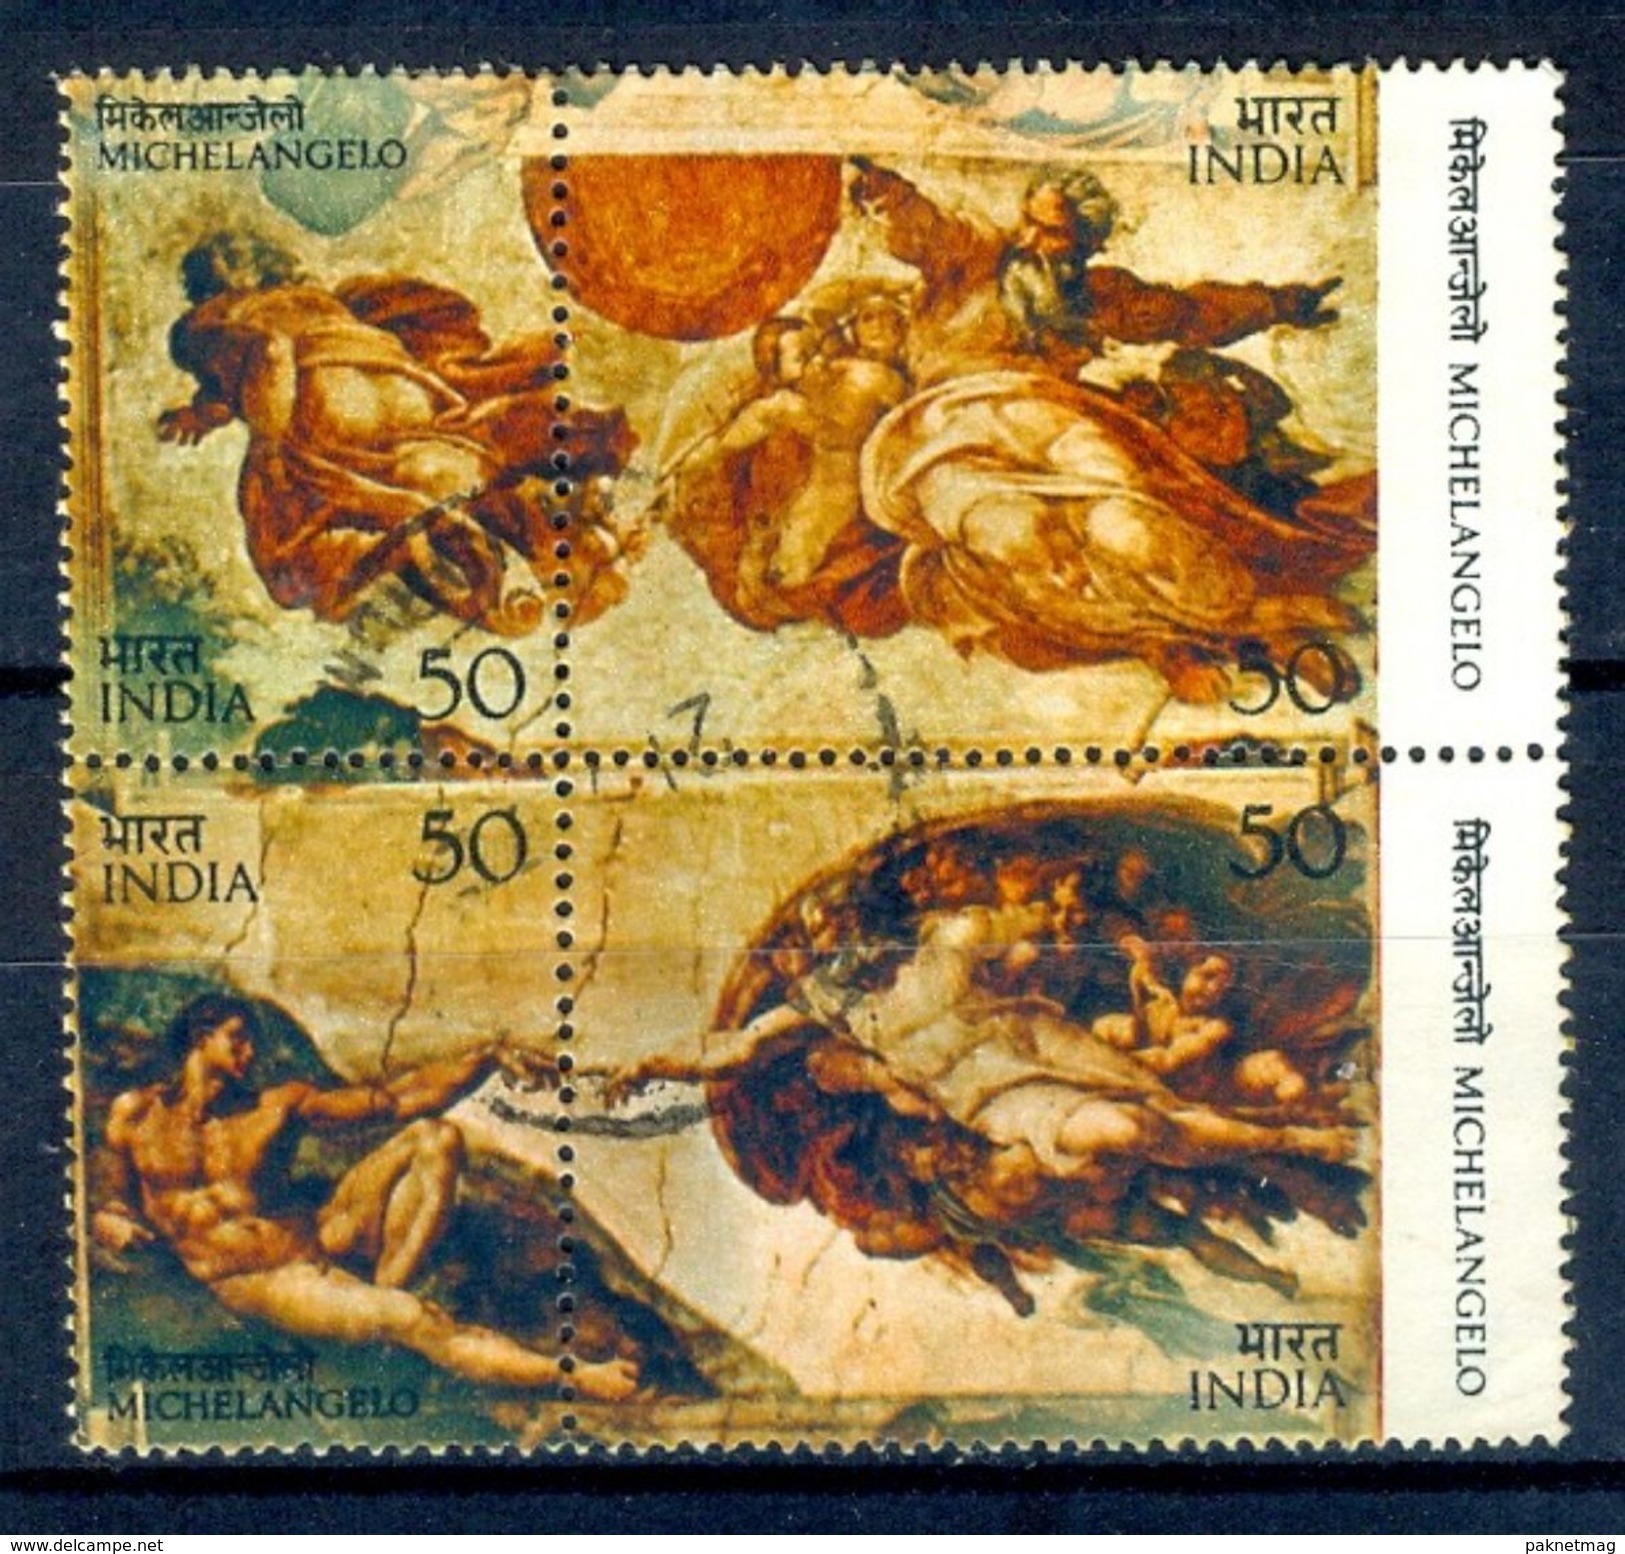 S137- India 1975. Michelangelo. Italy Painter & Sculpture. Art. Nude Painting. Painter. Artist. Religion. Christ. Bible. - Used Stamps